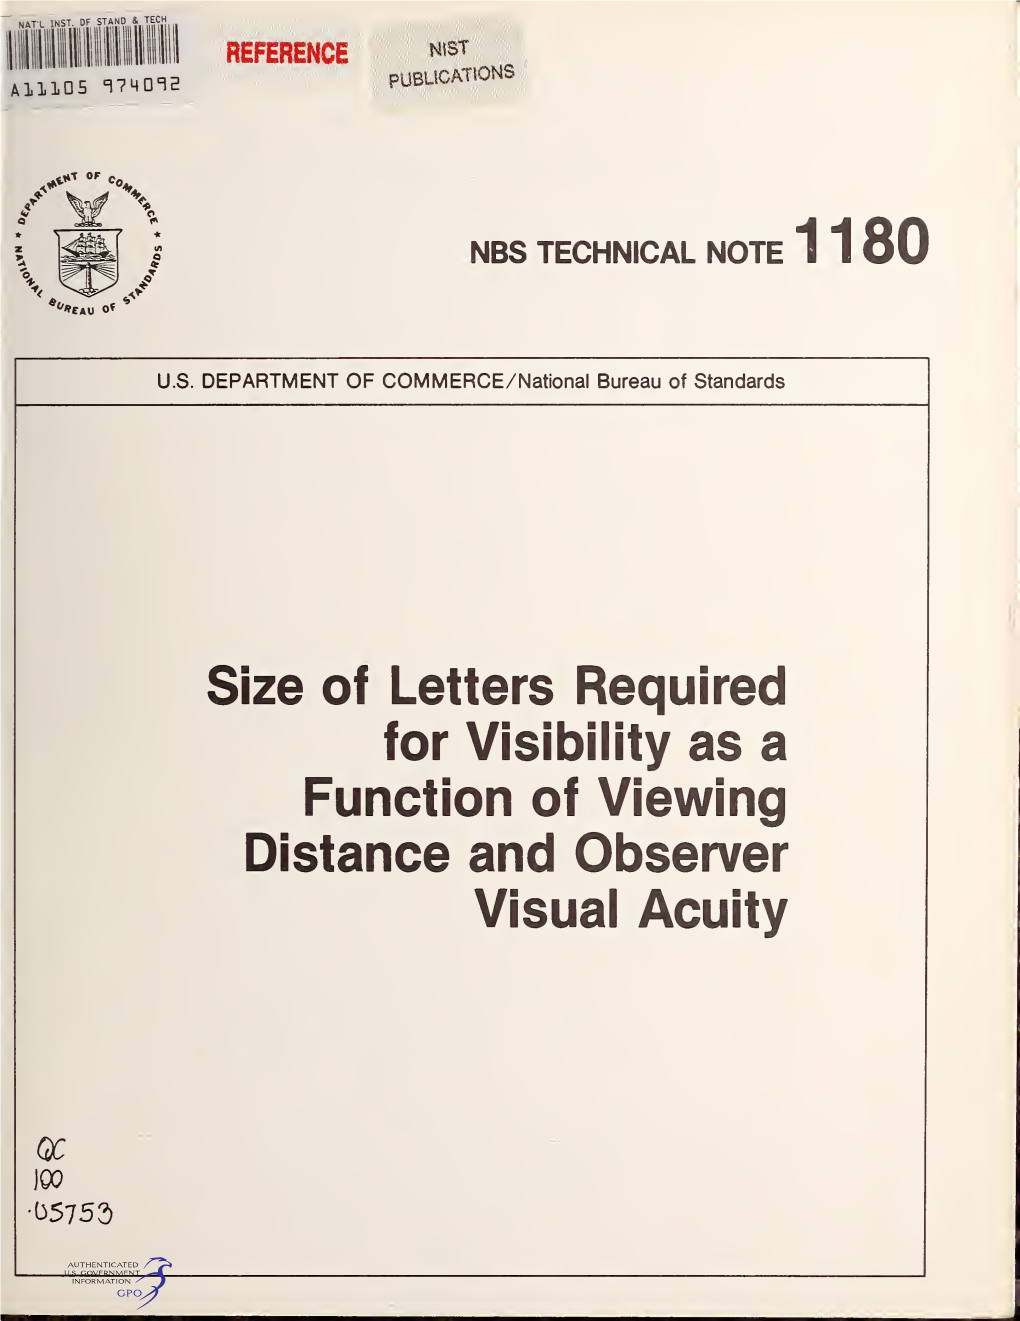 Size of Letters Required for Visibility As a Function of Viewing Distance and Observer Visual Acuity